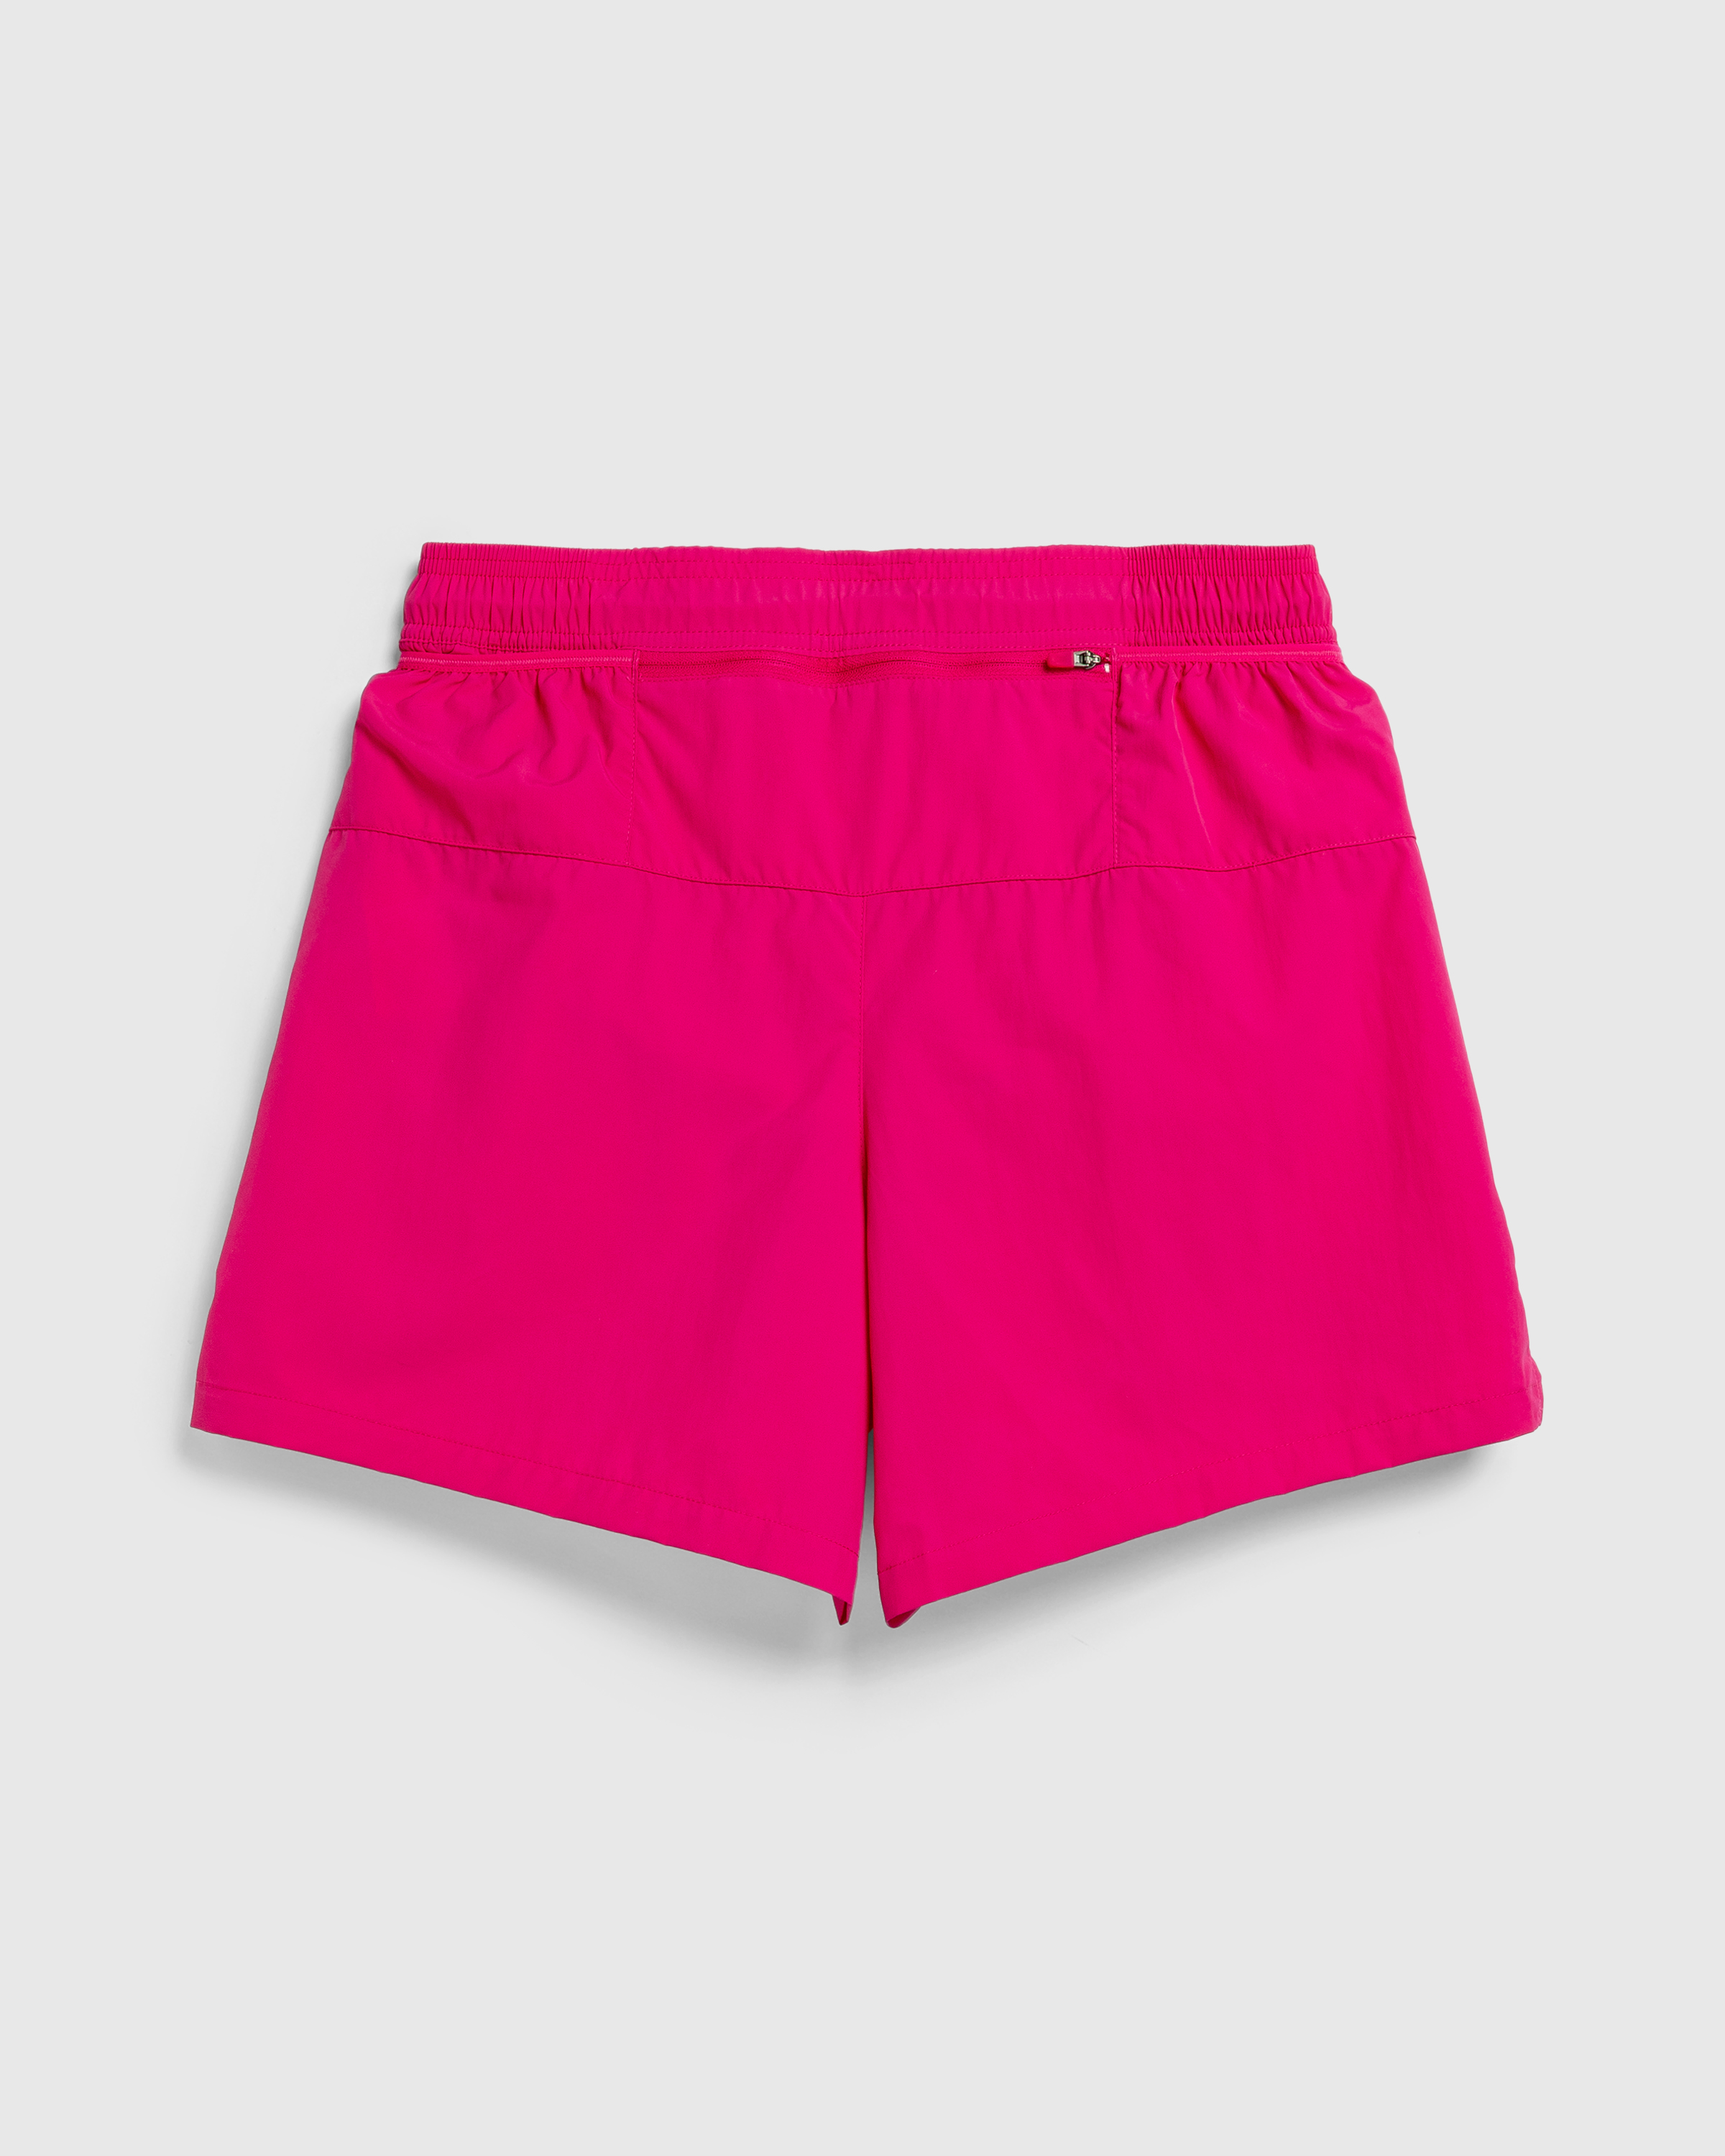 Nike x Patta – Men's Shorts Fireberry - Active Shorts - Red - Image 6